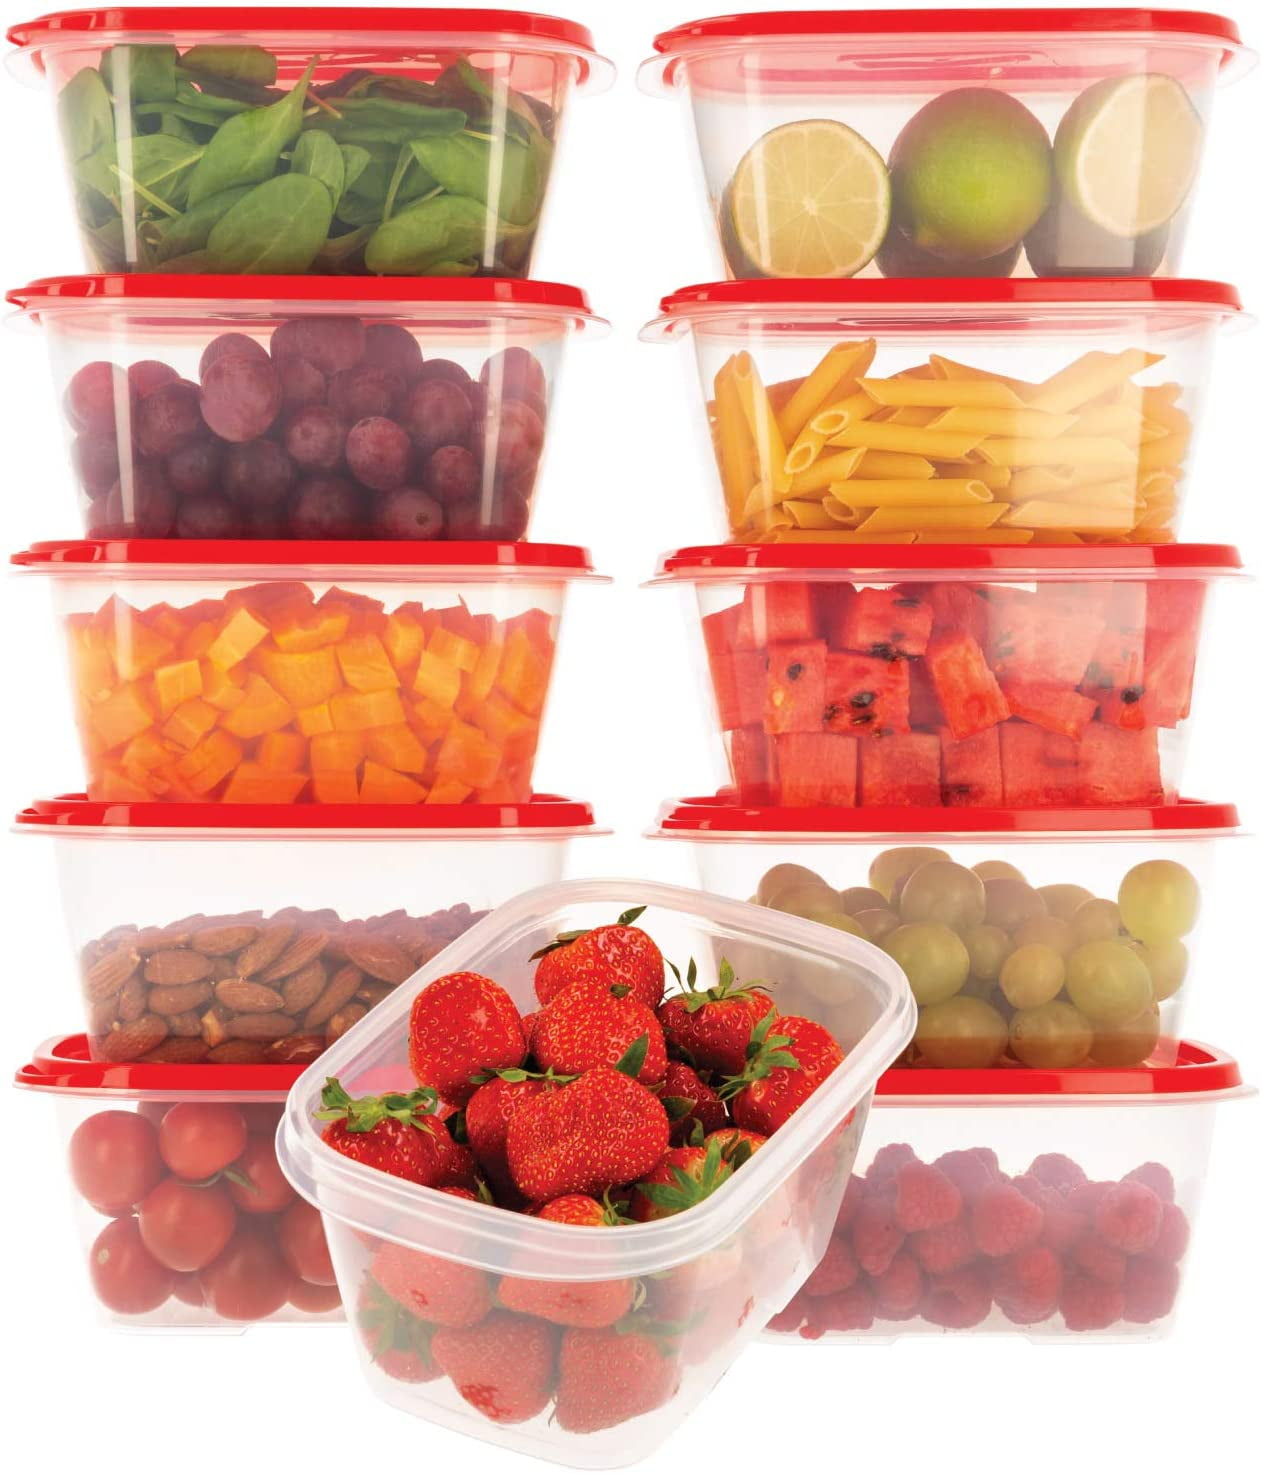 JTR Meal Prep Container [20 Pack] Single 1 Compartment with Lids, Food Storage Bento Box | BPA Free | Stackable | Reusable Lunch Boxes, Microwave